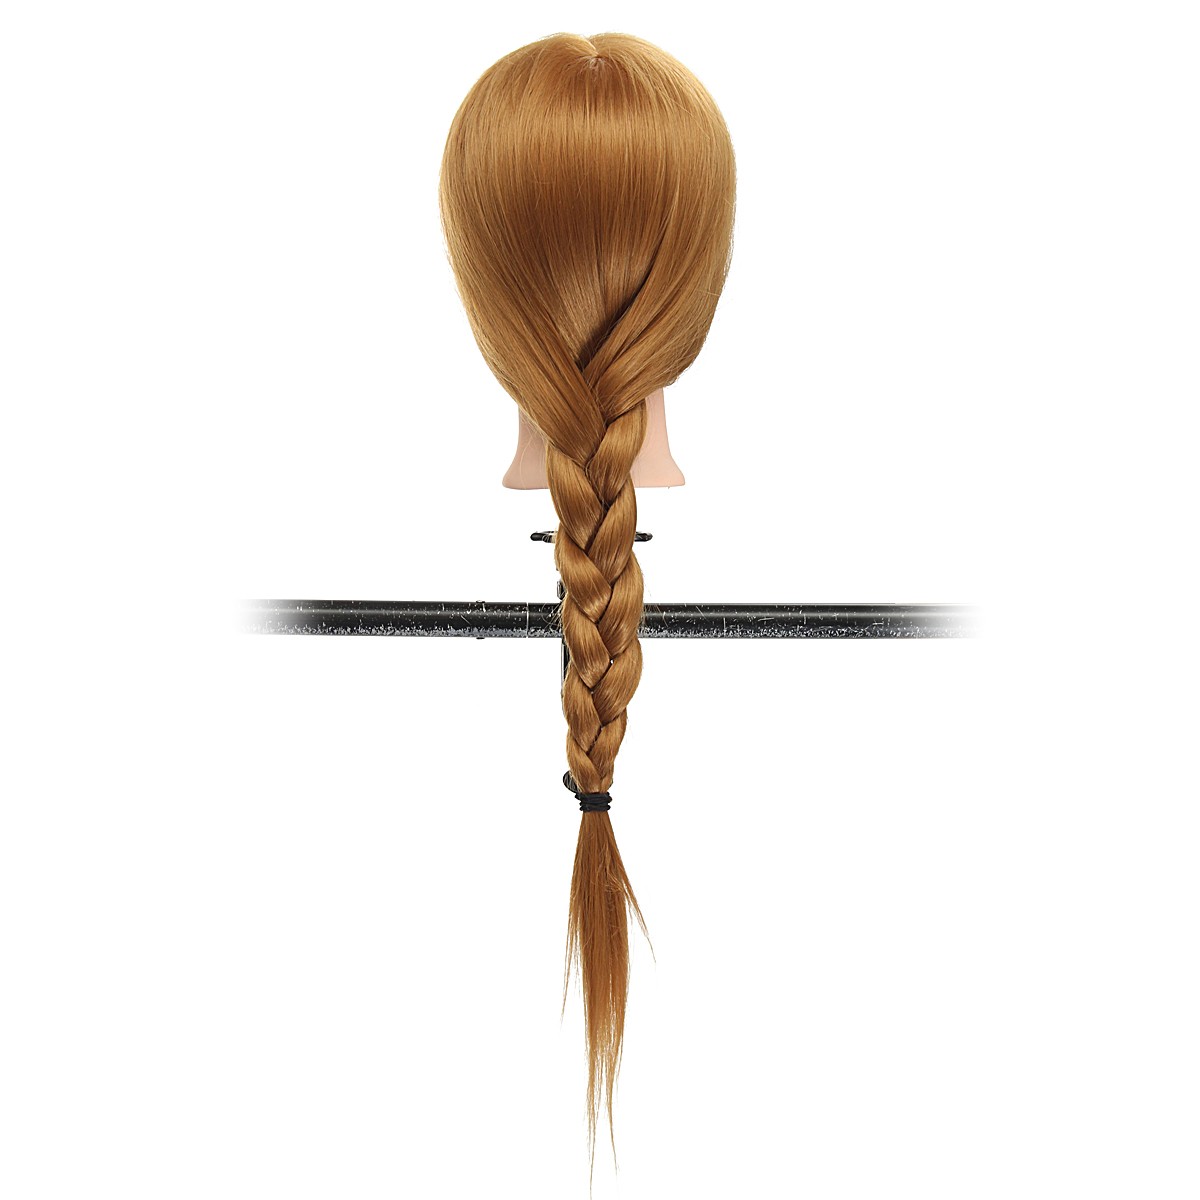 26quot-Long-Hair-Training-Mannequin-Head-Model-Hairdressing-Makeup-Practice-with-Clamp-Holder-1076404